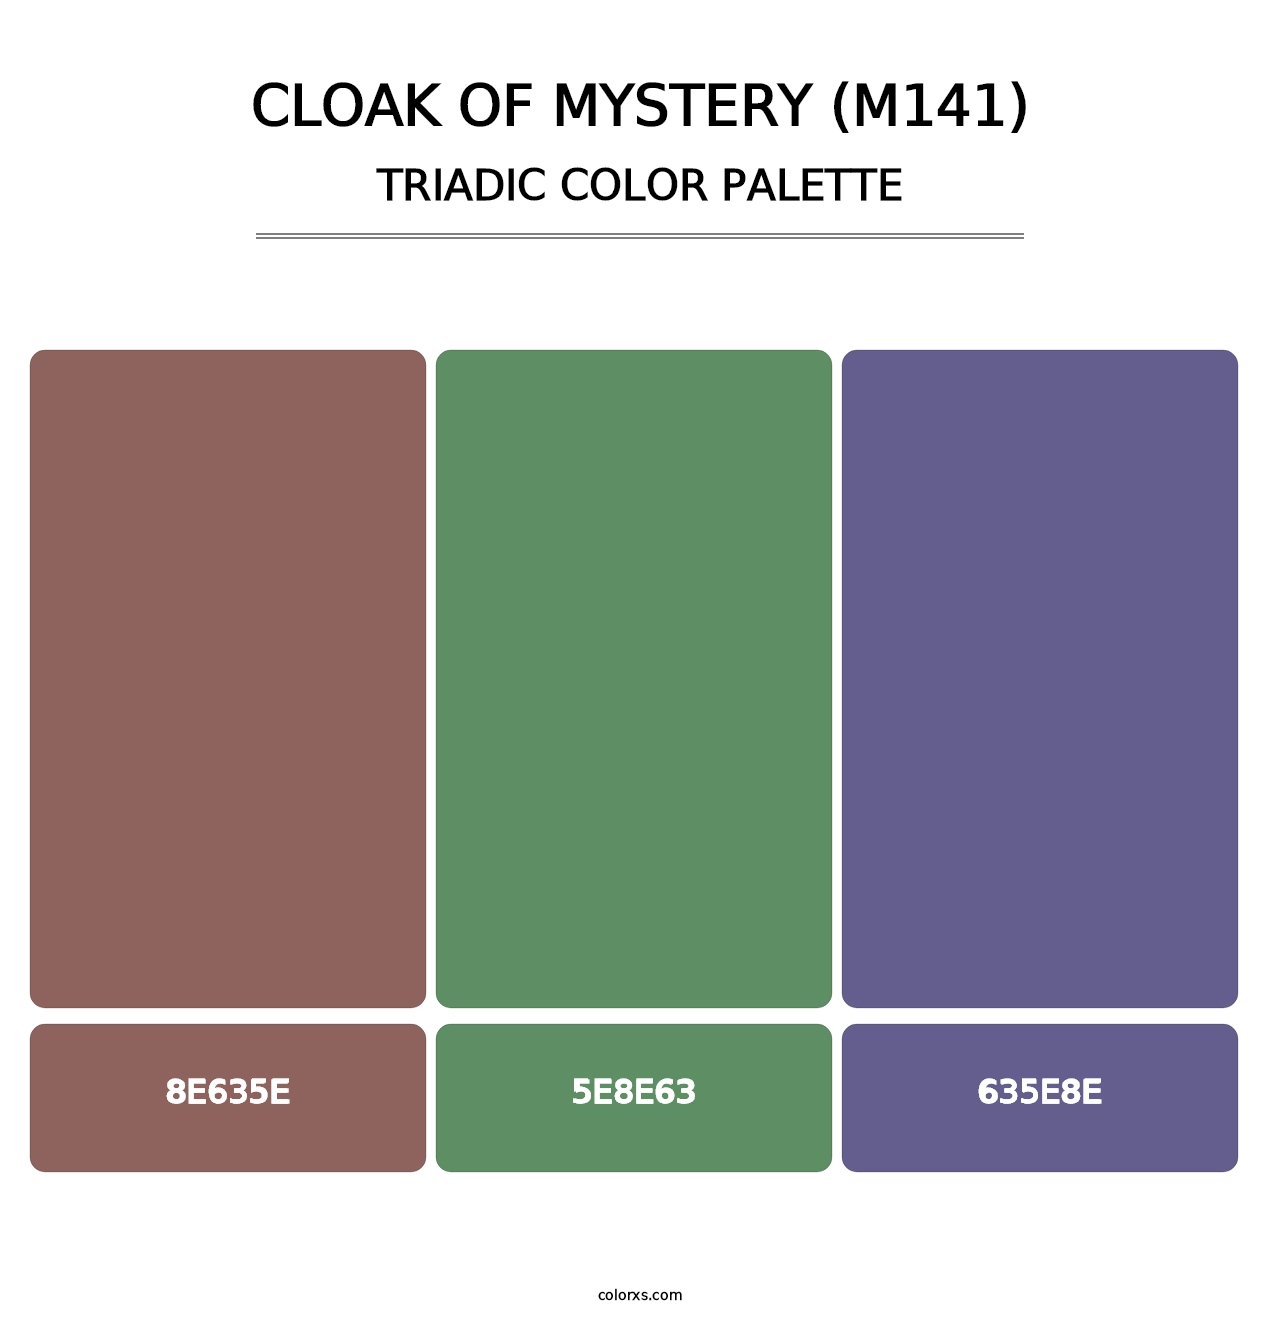 Cloak of Mystery (M141) - Triadic Color Palette